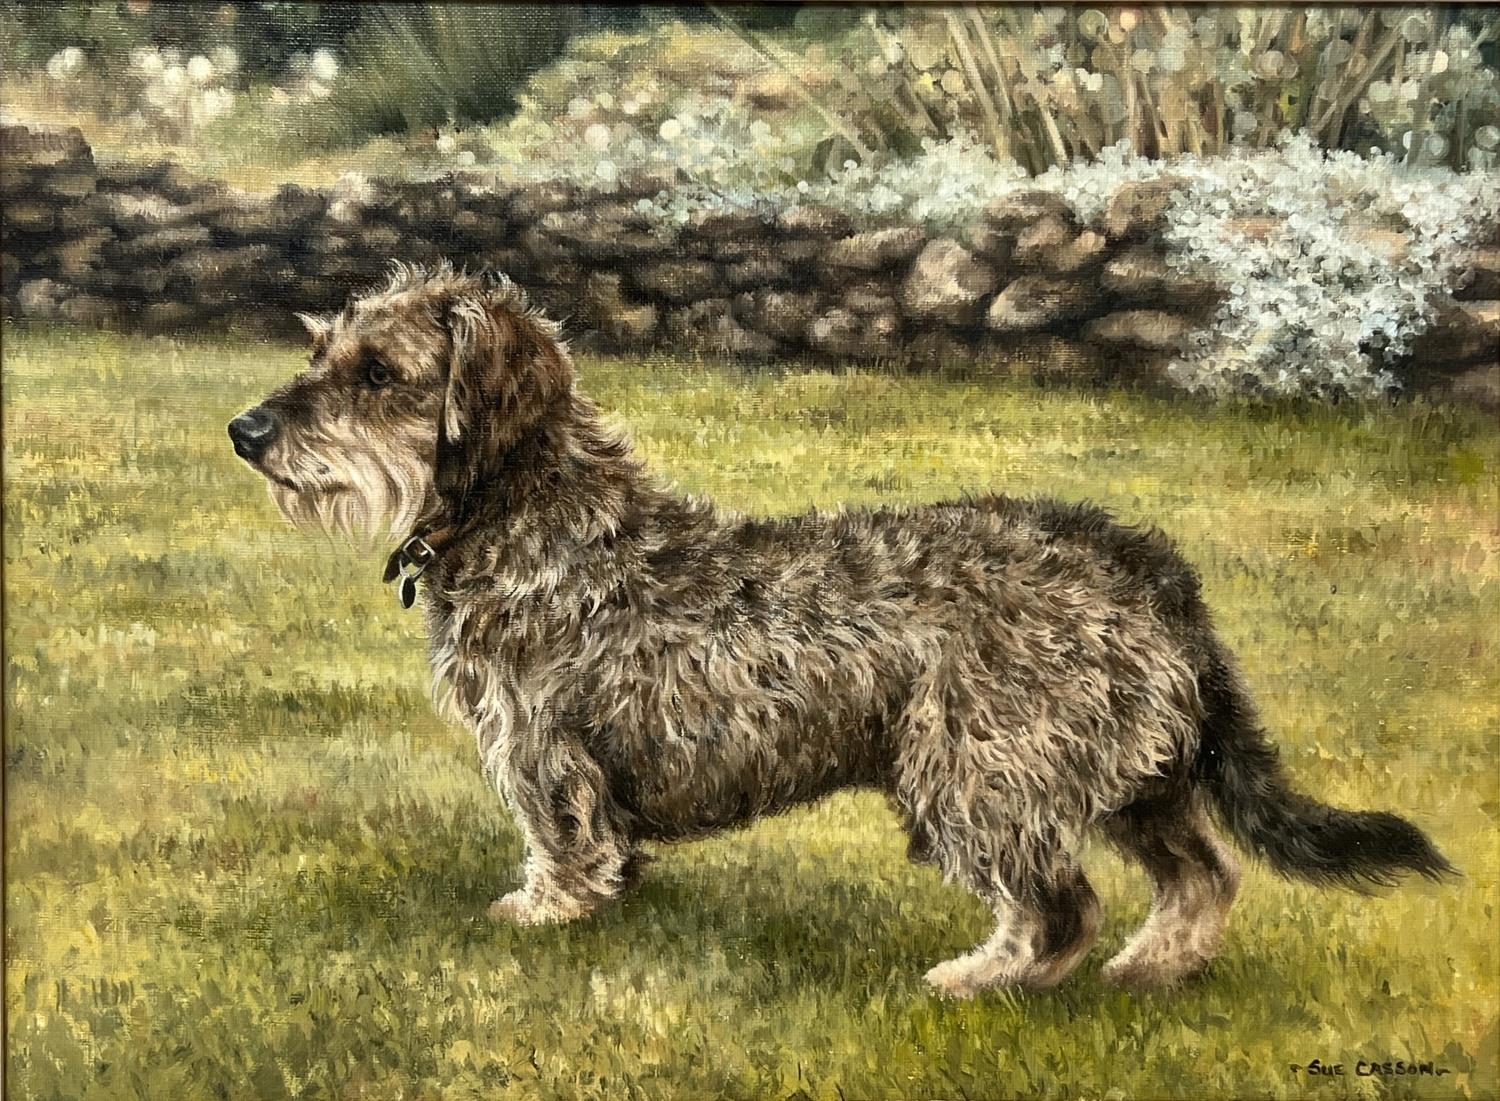 SUE CASSON (20th century British), 'Wire Haired Dachshund', oil on canvas, 34cm x 44cm, framed. - Image 2 of 4